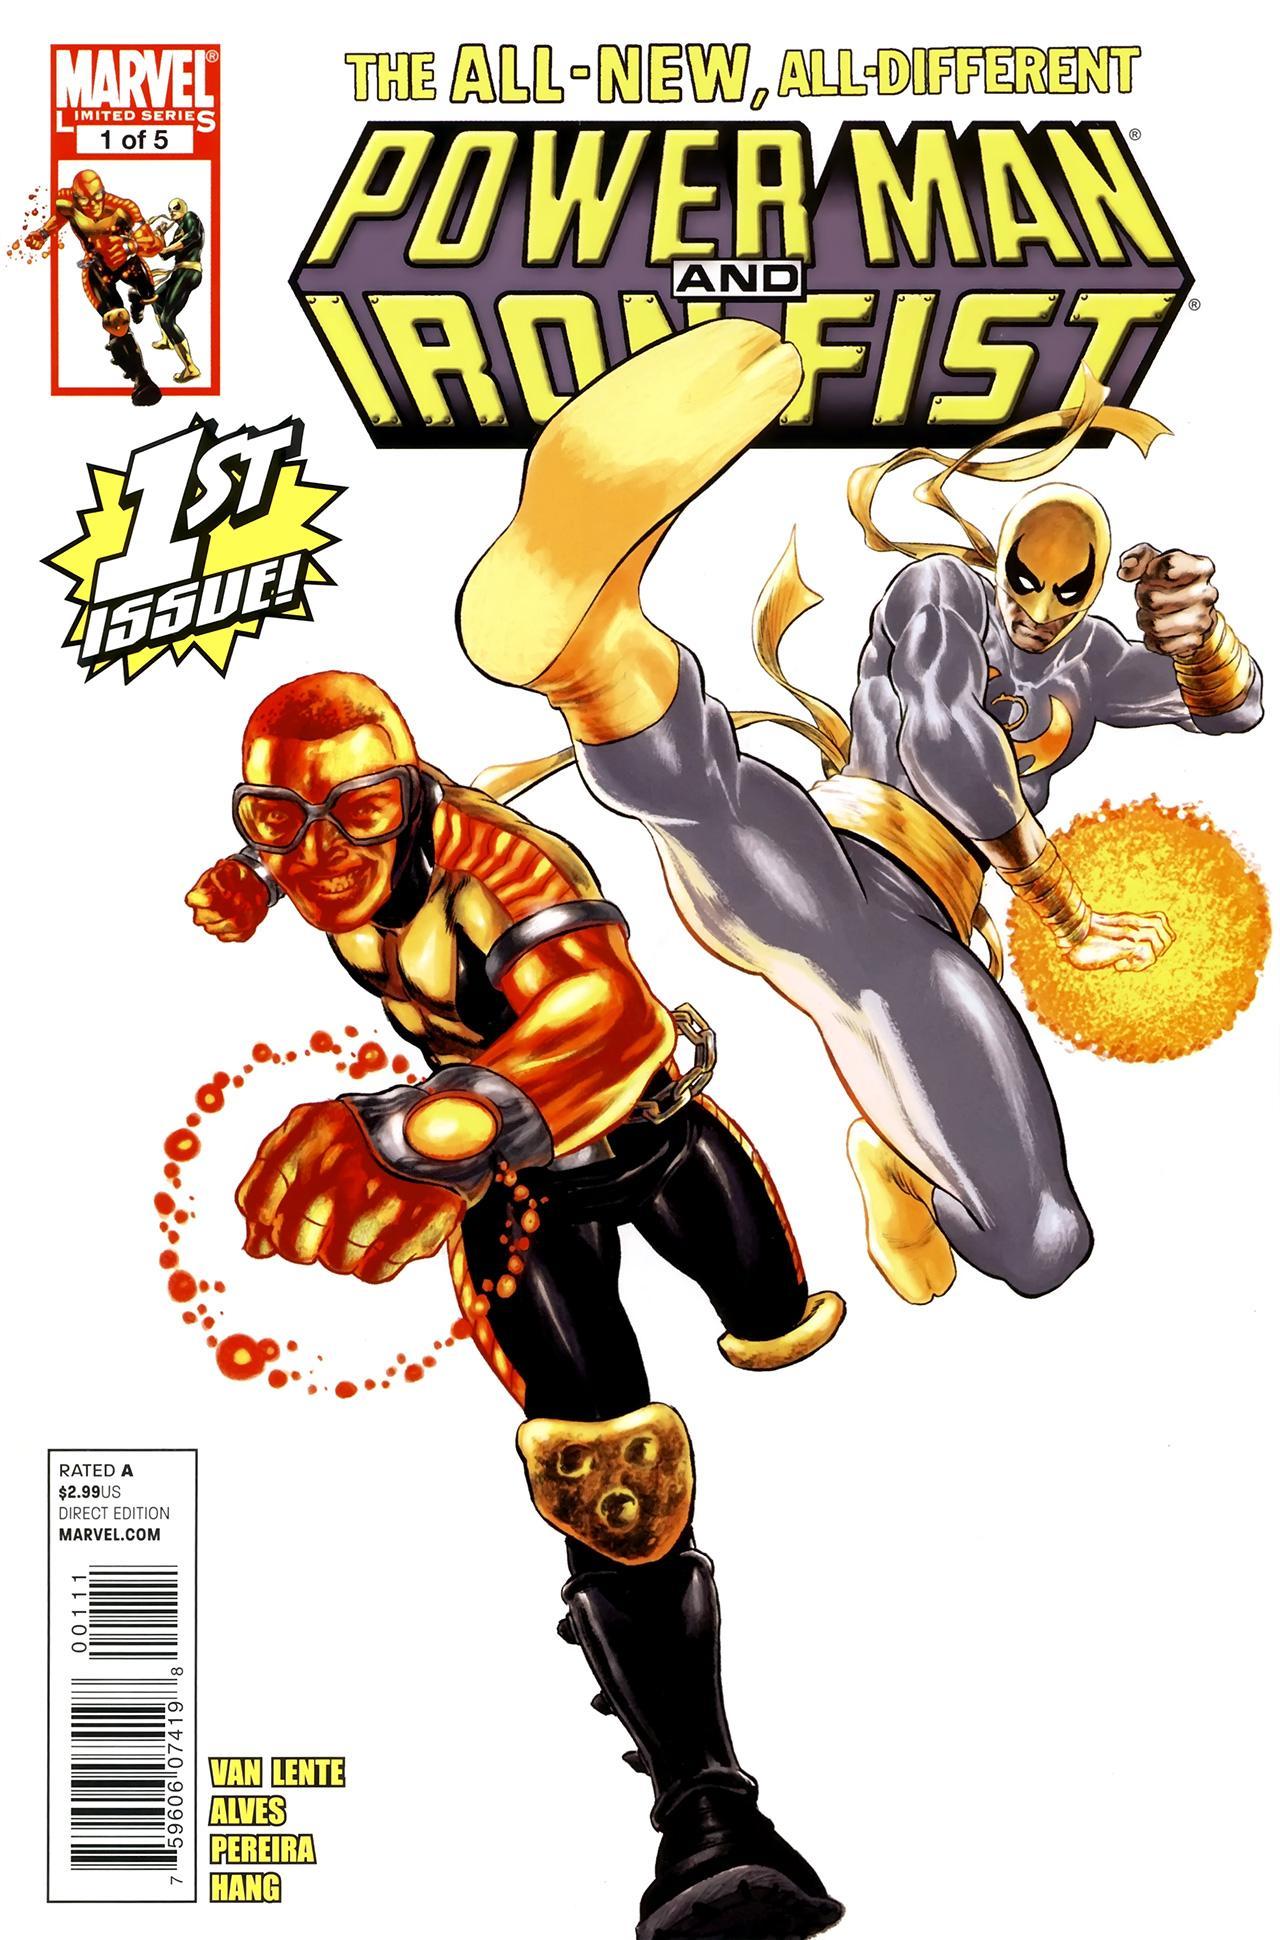 Power Man and Iron Fist Vol. 2 #1